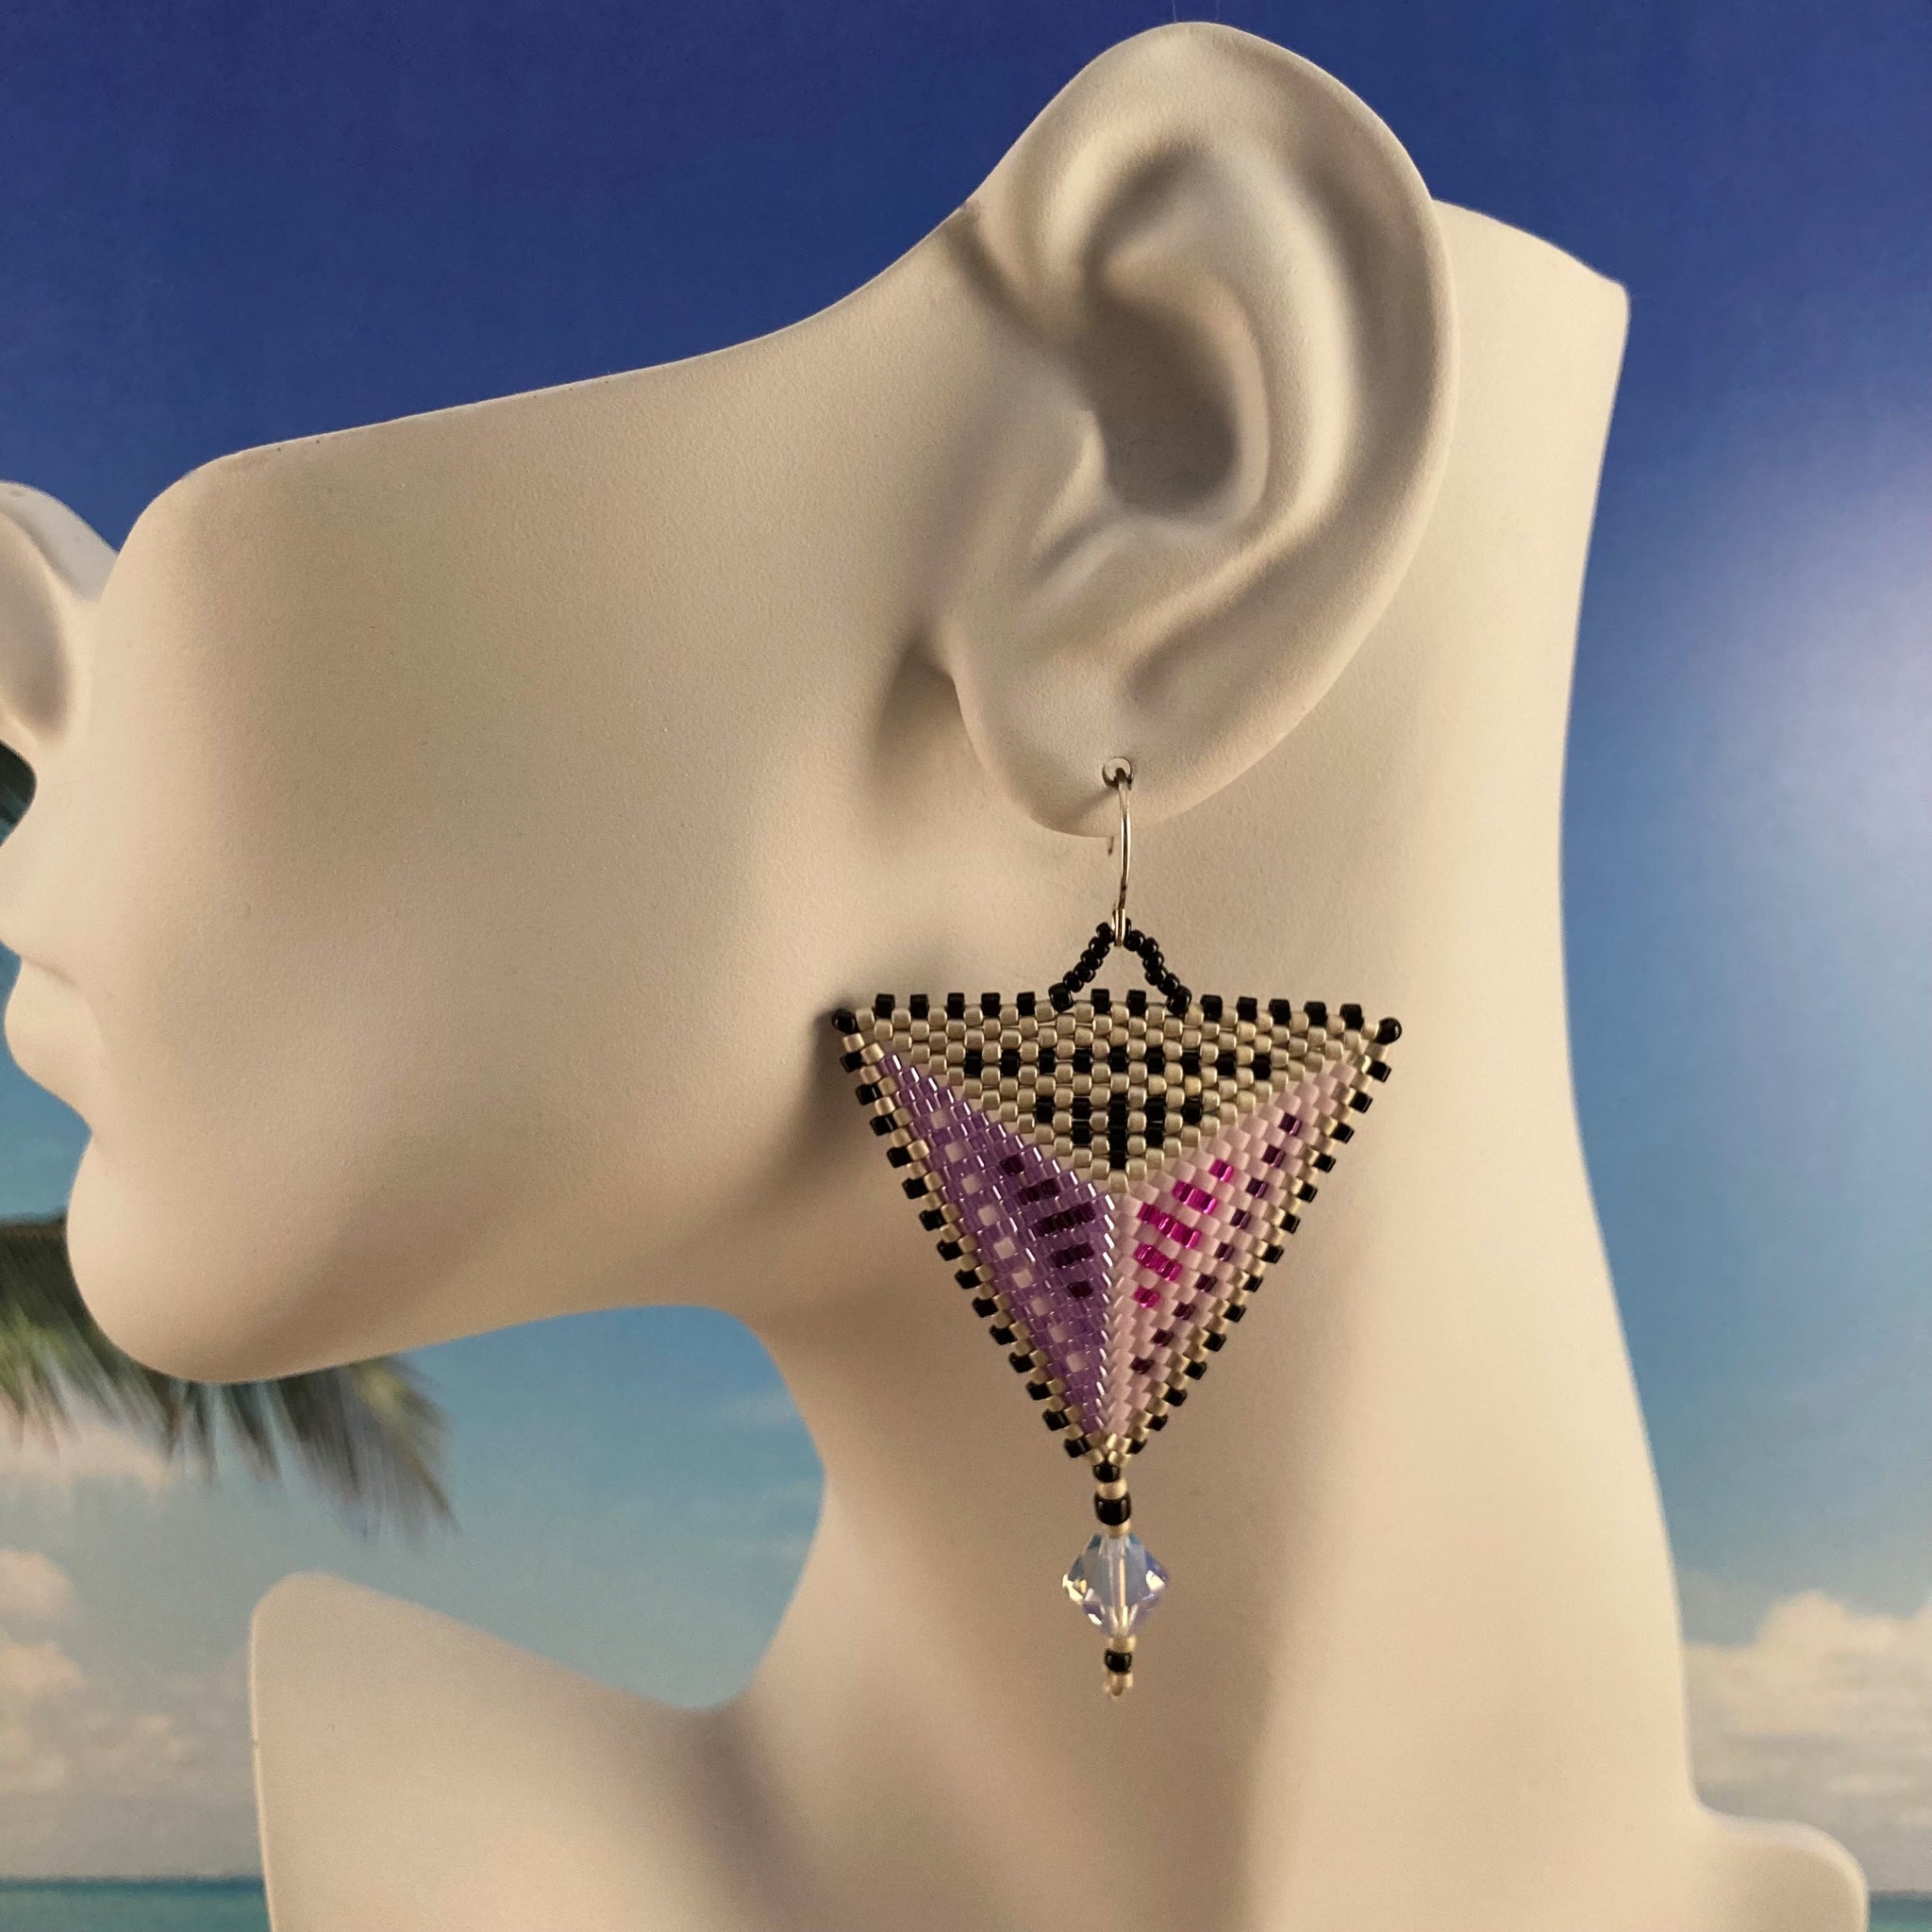 Lilac purple and pink Contemporary Modern Geometric Triangle Beaded Earrings matching Large Swarovski crystals sterling silver ear wires lightweight stunning artisan handmade Beaded By The Beach couture party 